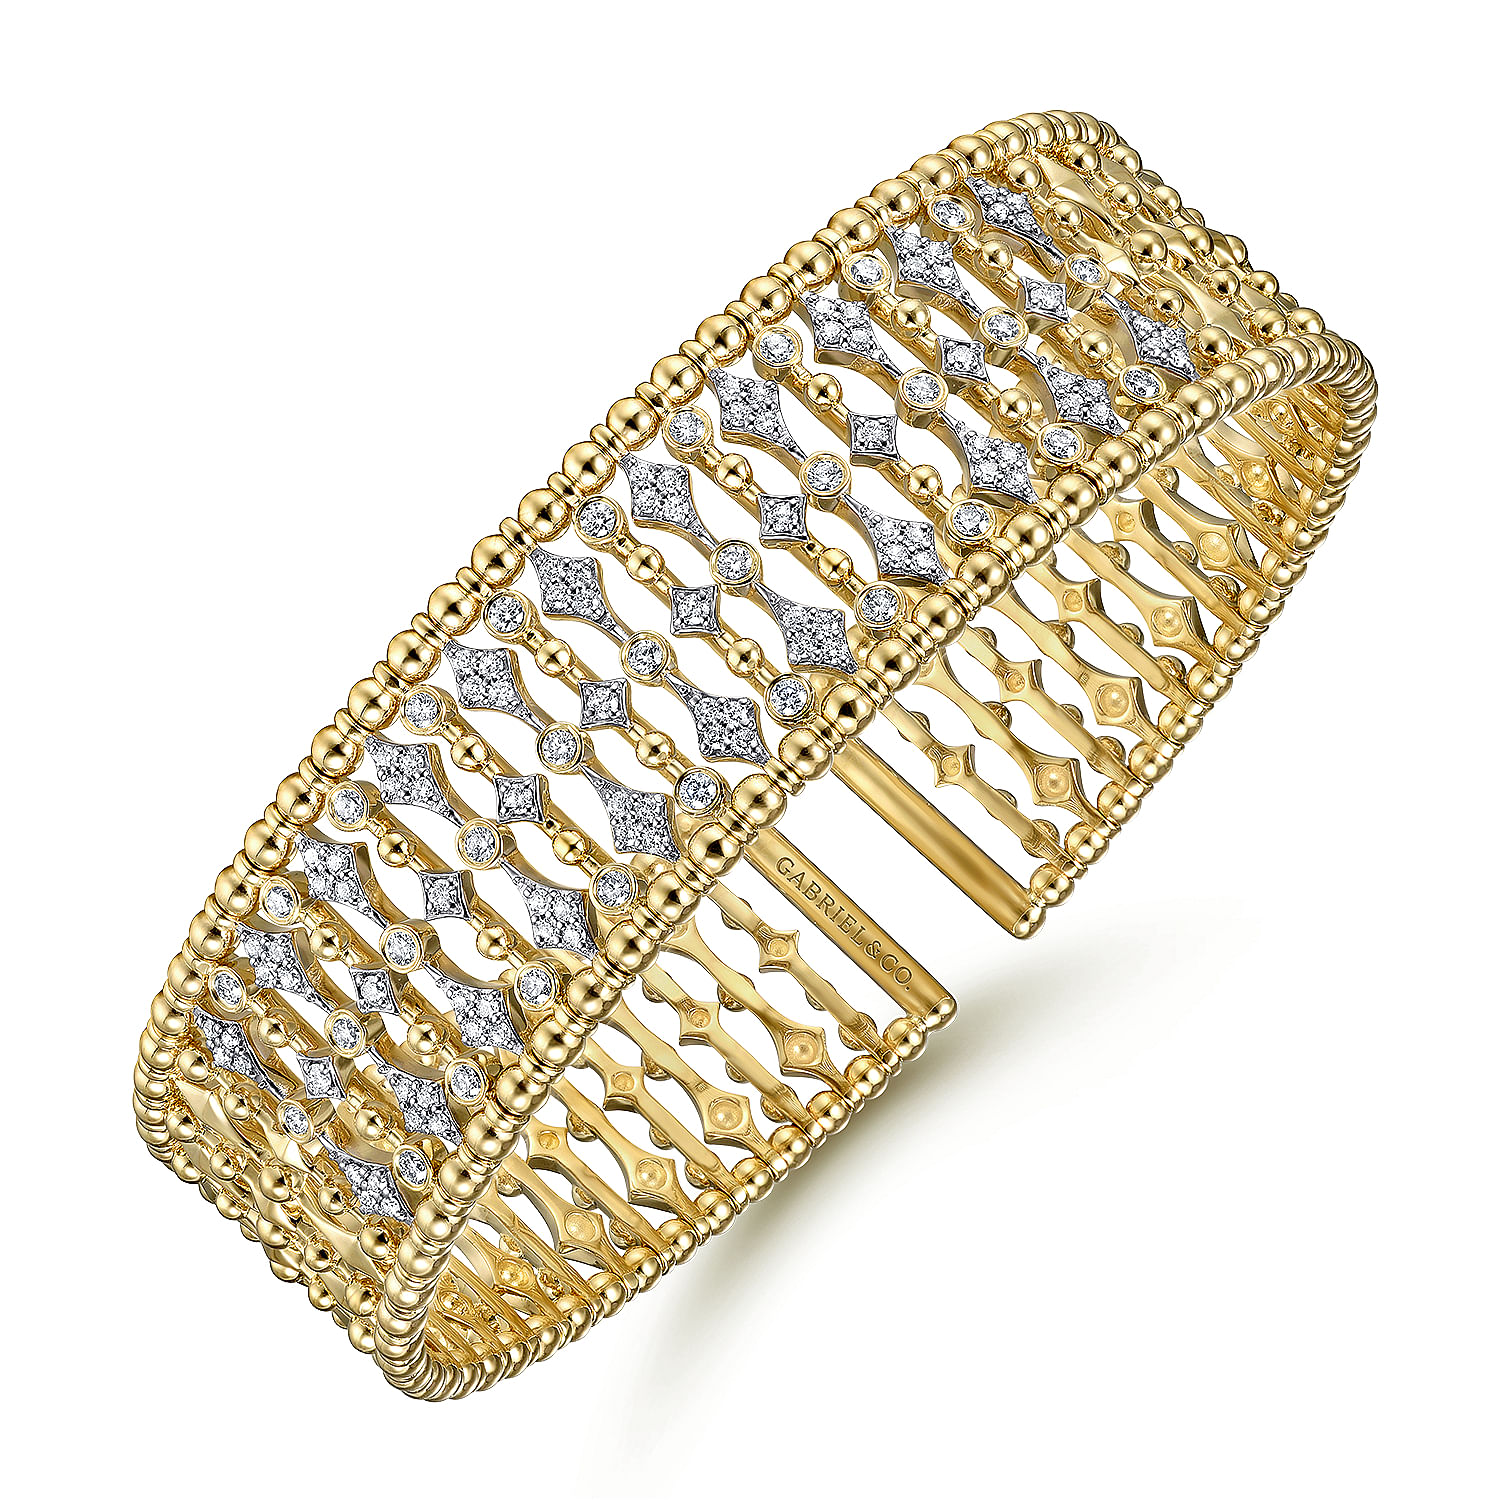 Wide 14K Yellow Gold Cage Cuff Bracelet with Diamond Stations